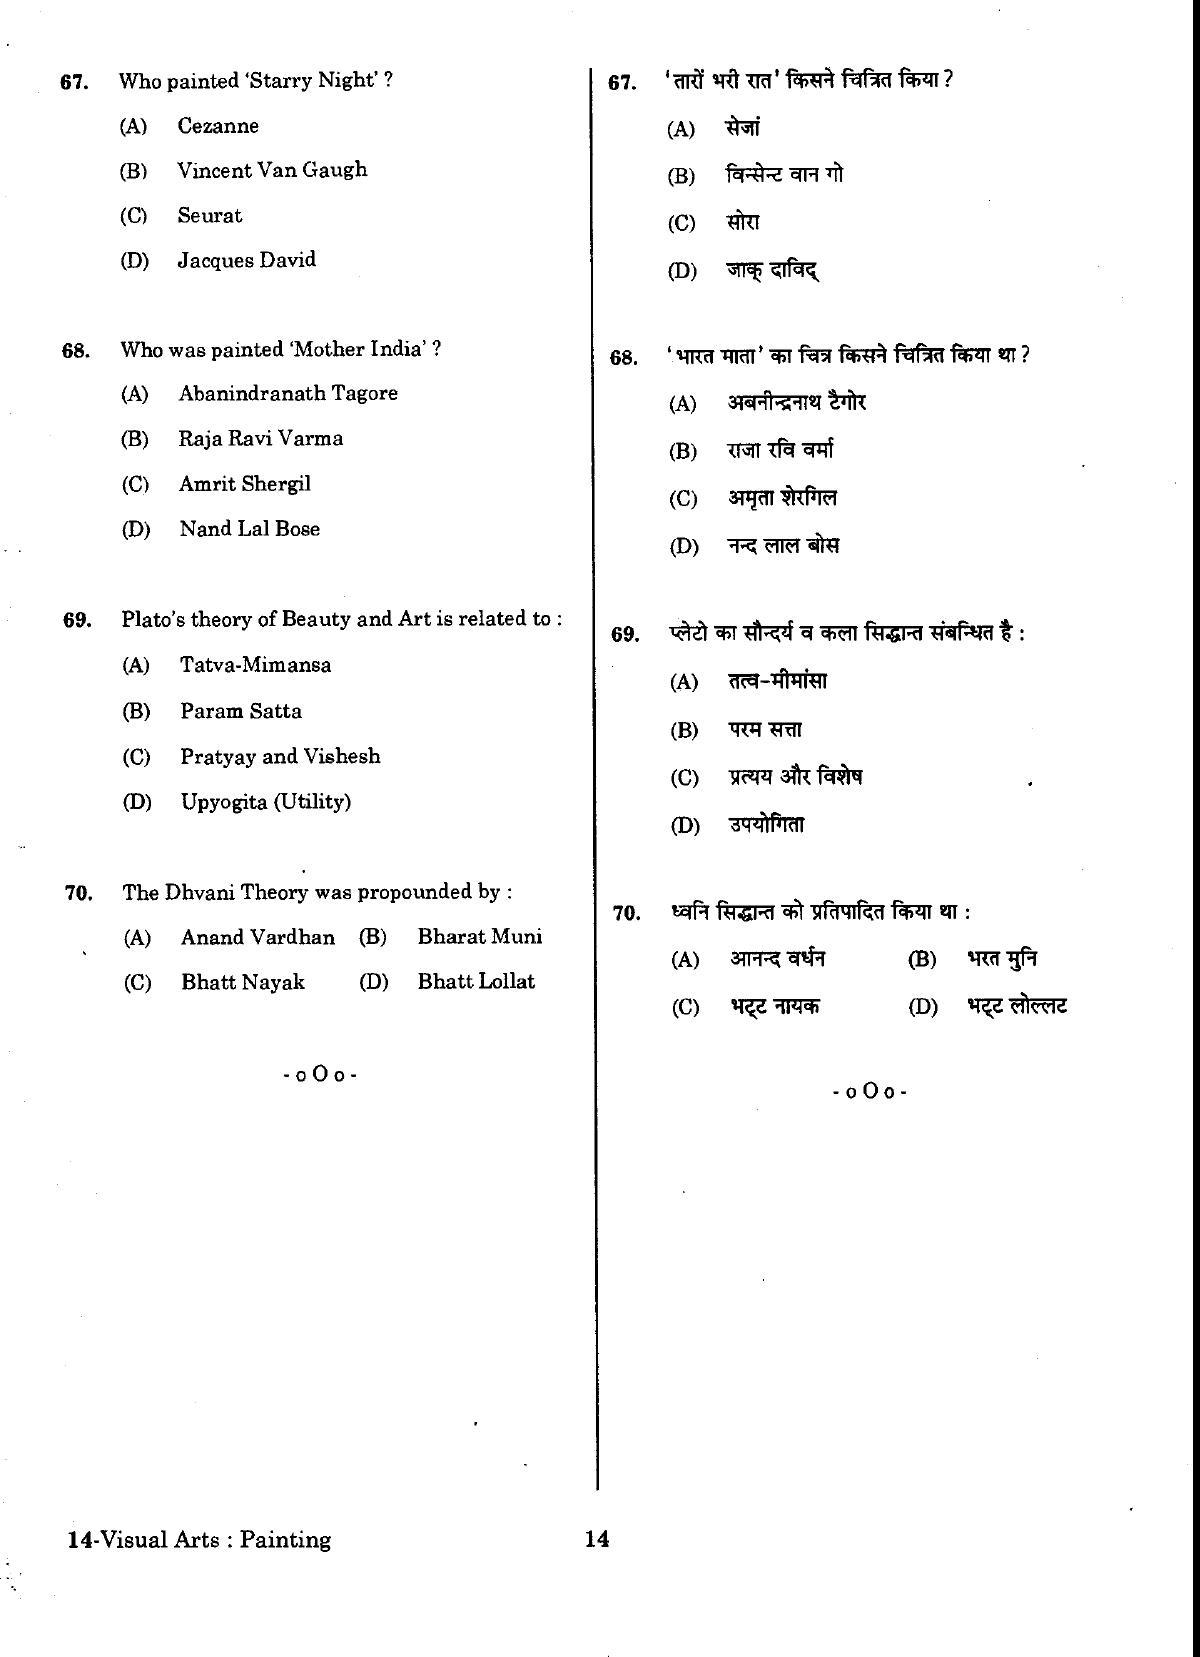 URATPG Visual Arts Painting Sample Question Paper 2018 - Page 13